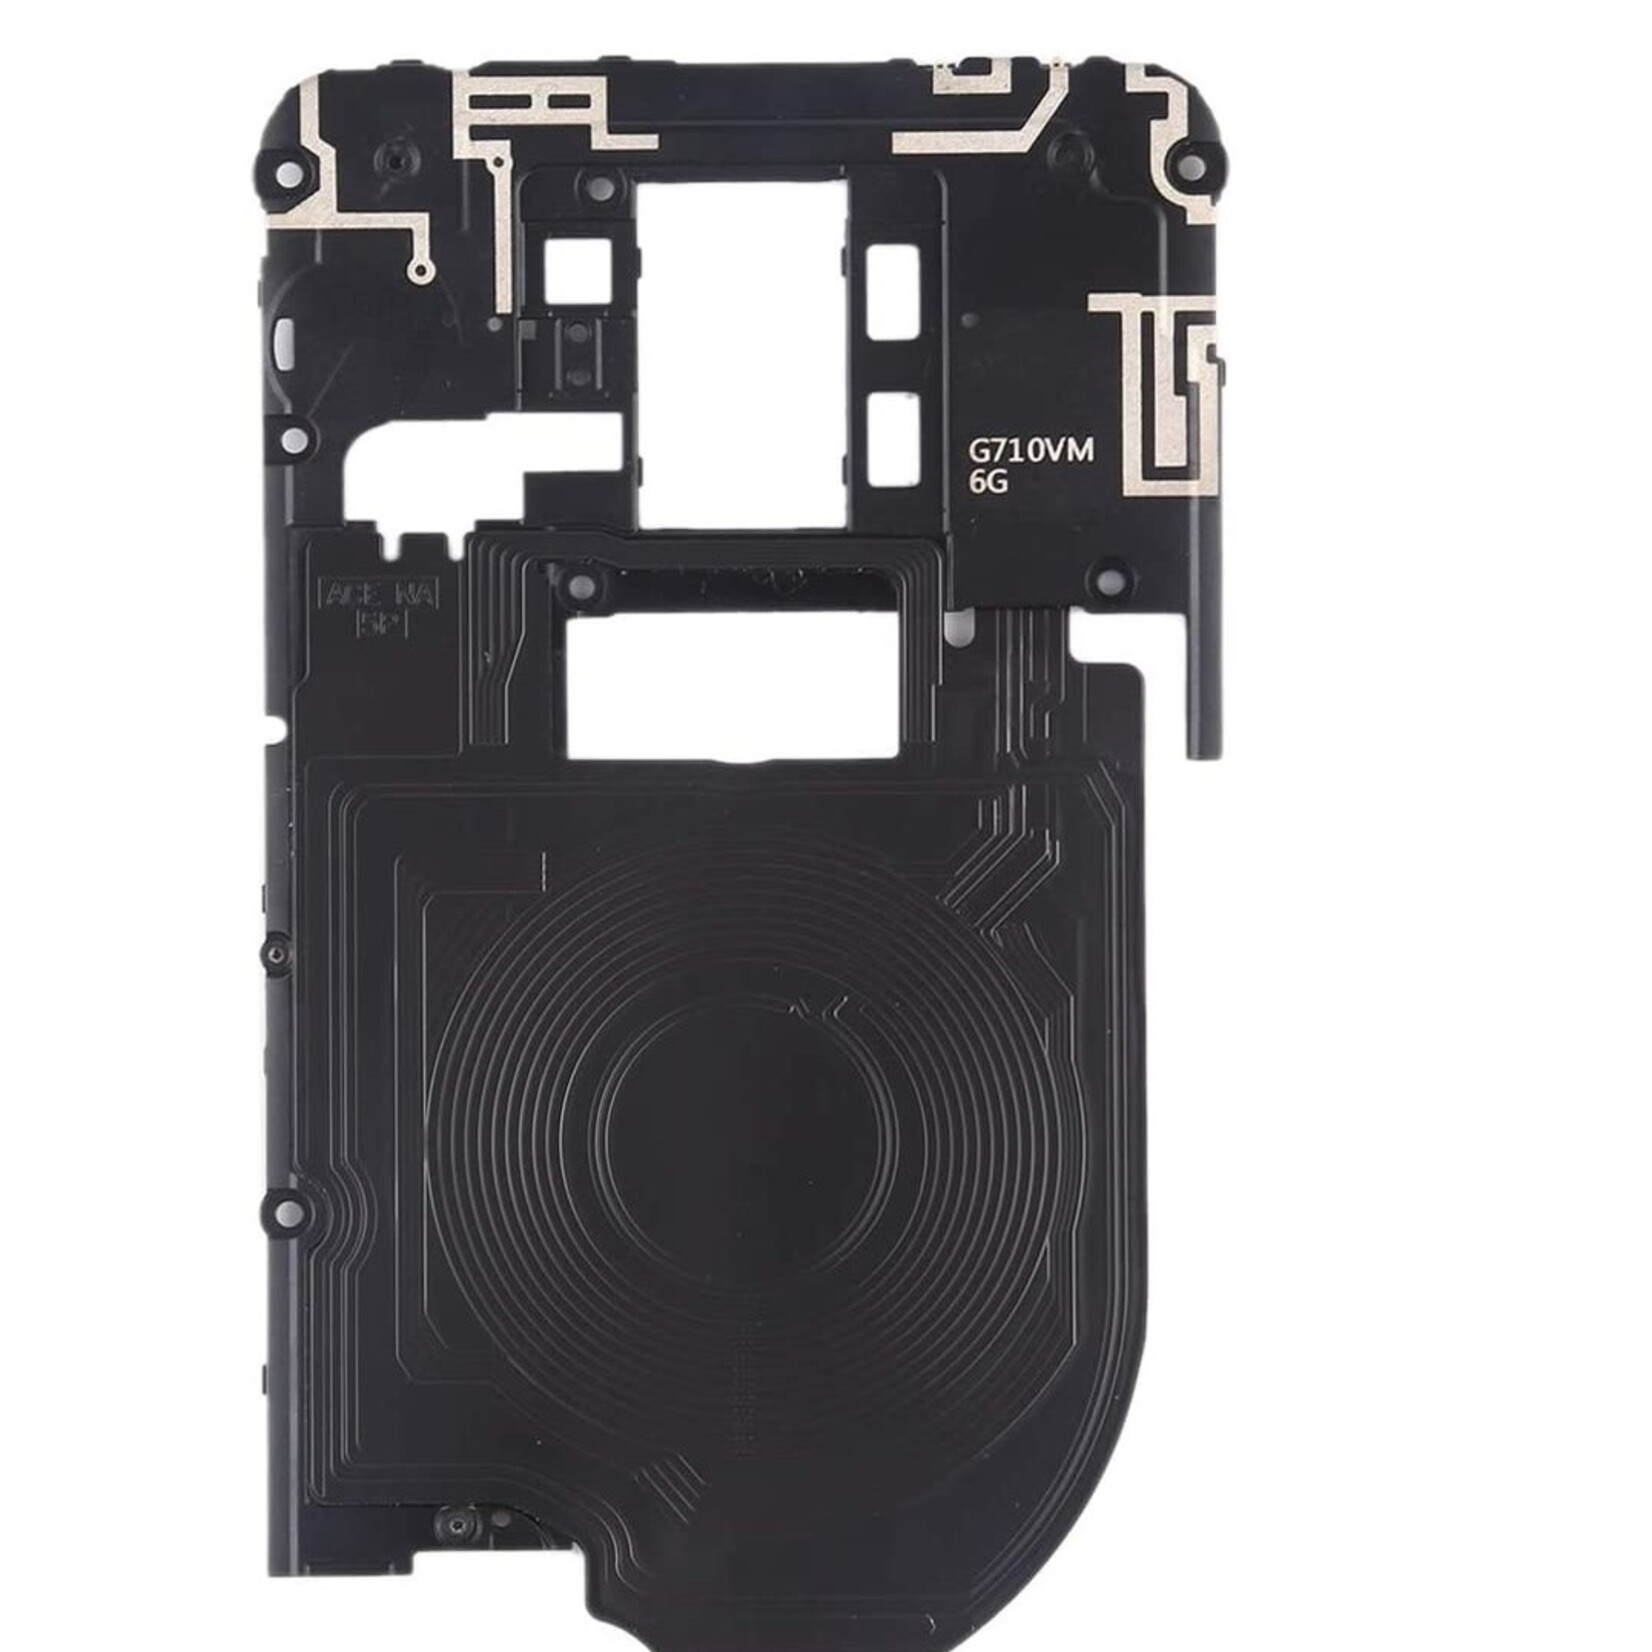 LG BACK HOUSING WITH NFC COIL LG G7